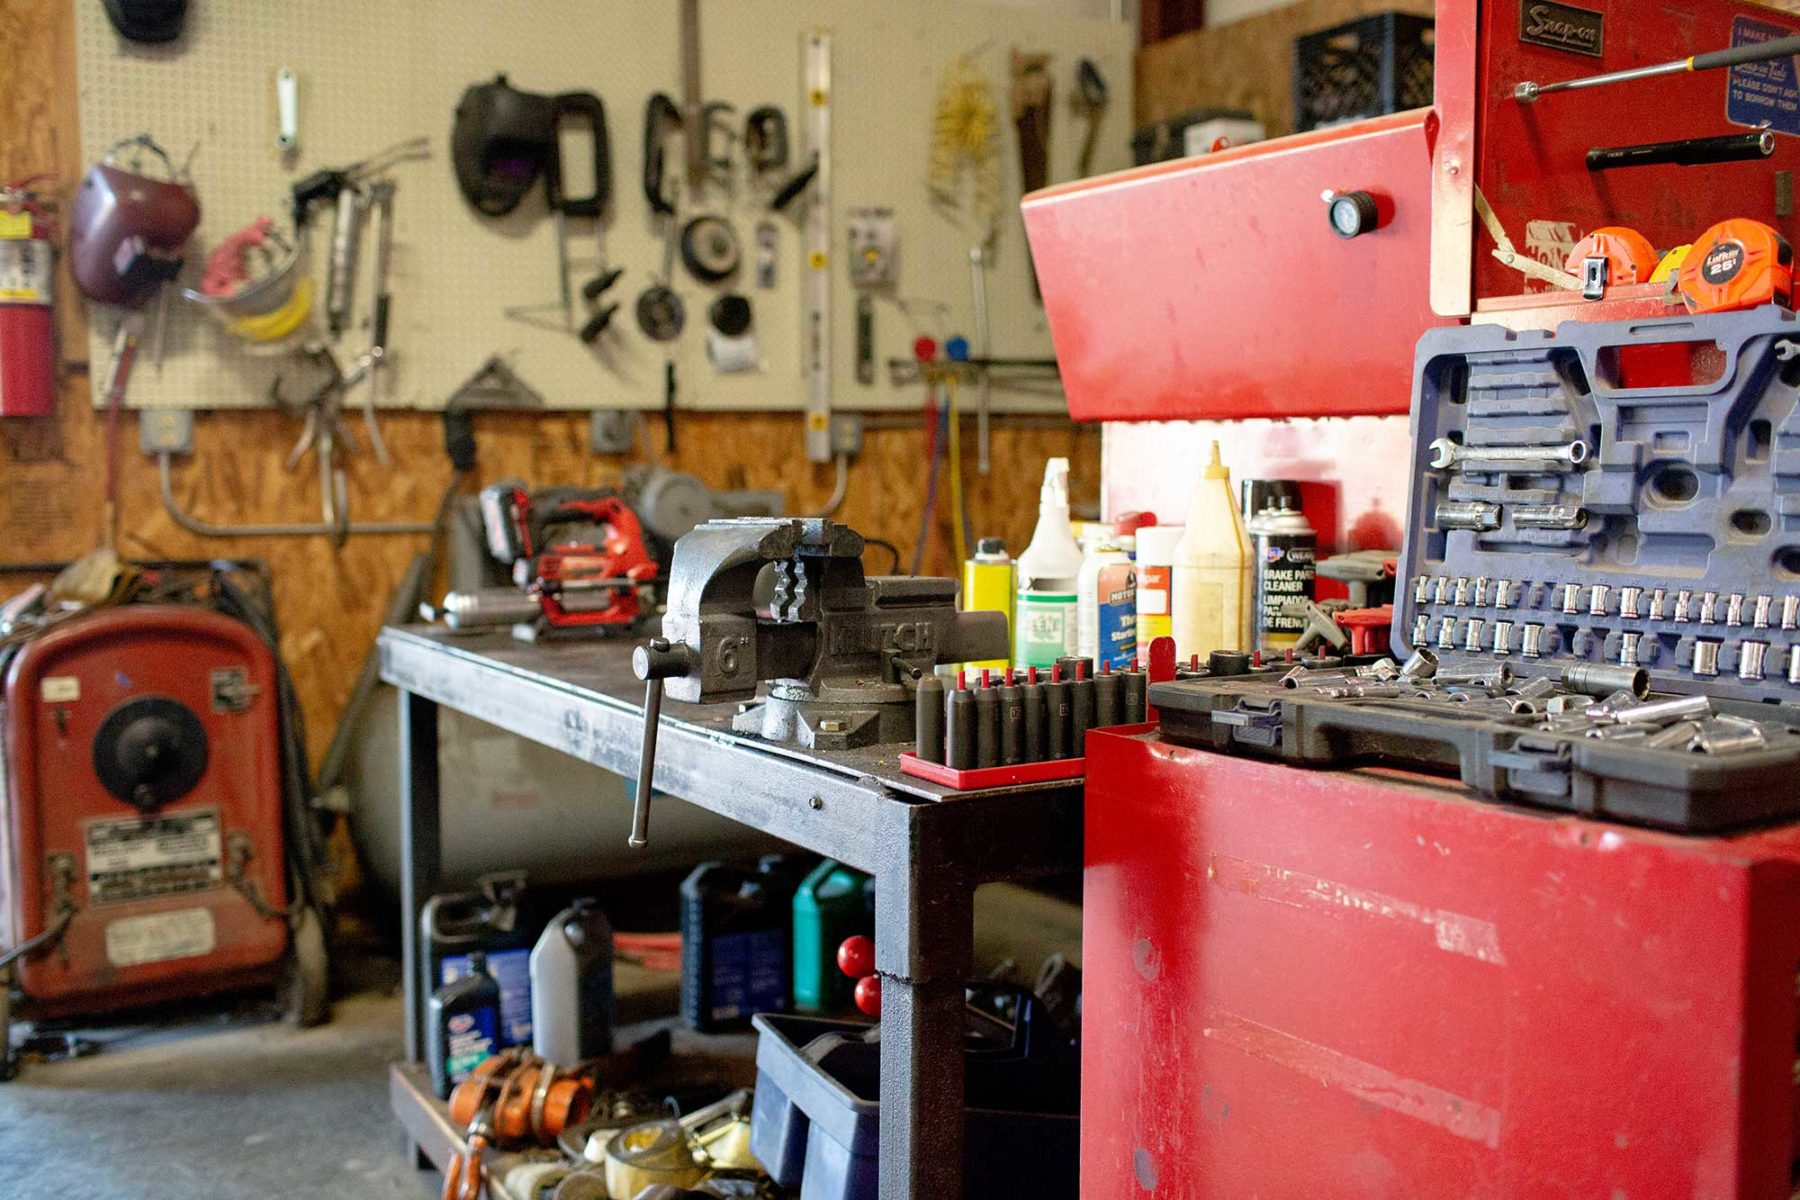 Tool bench and tool box